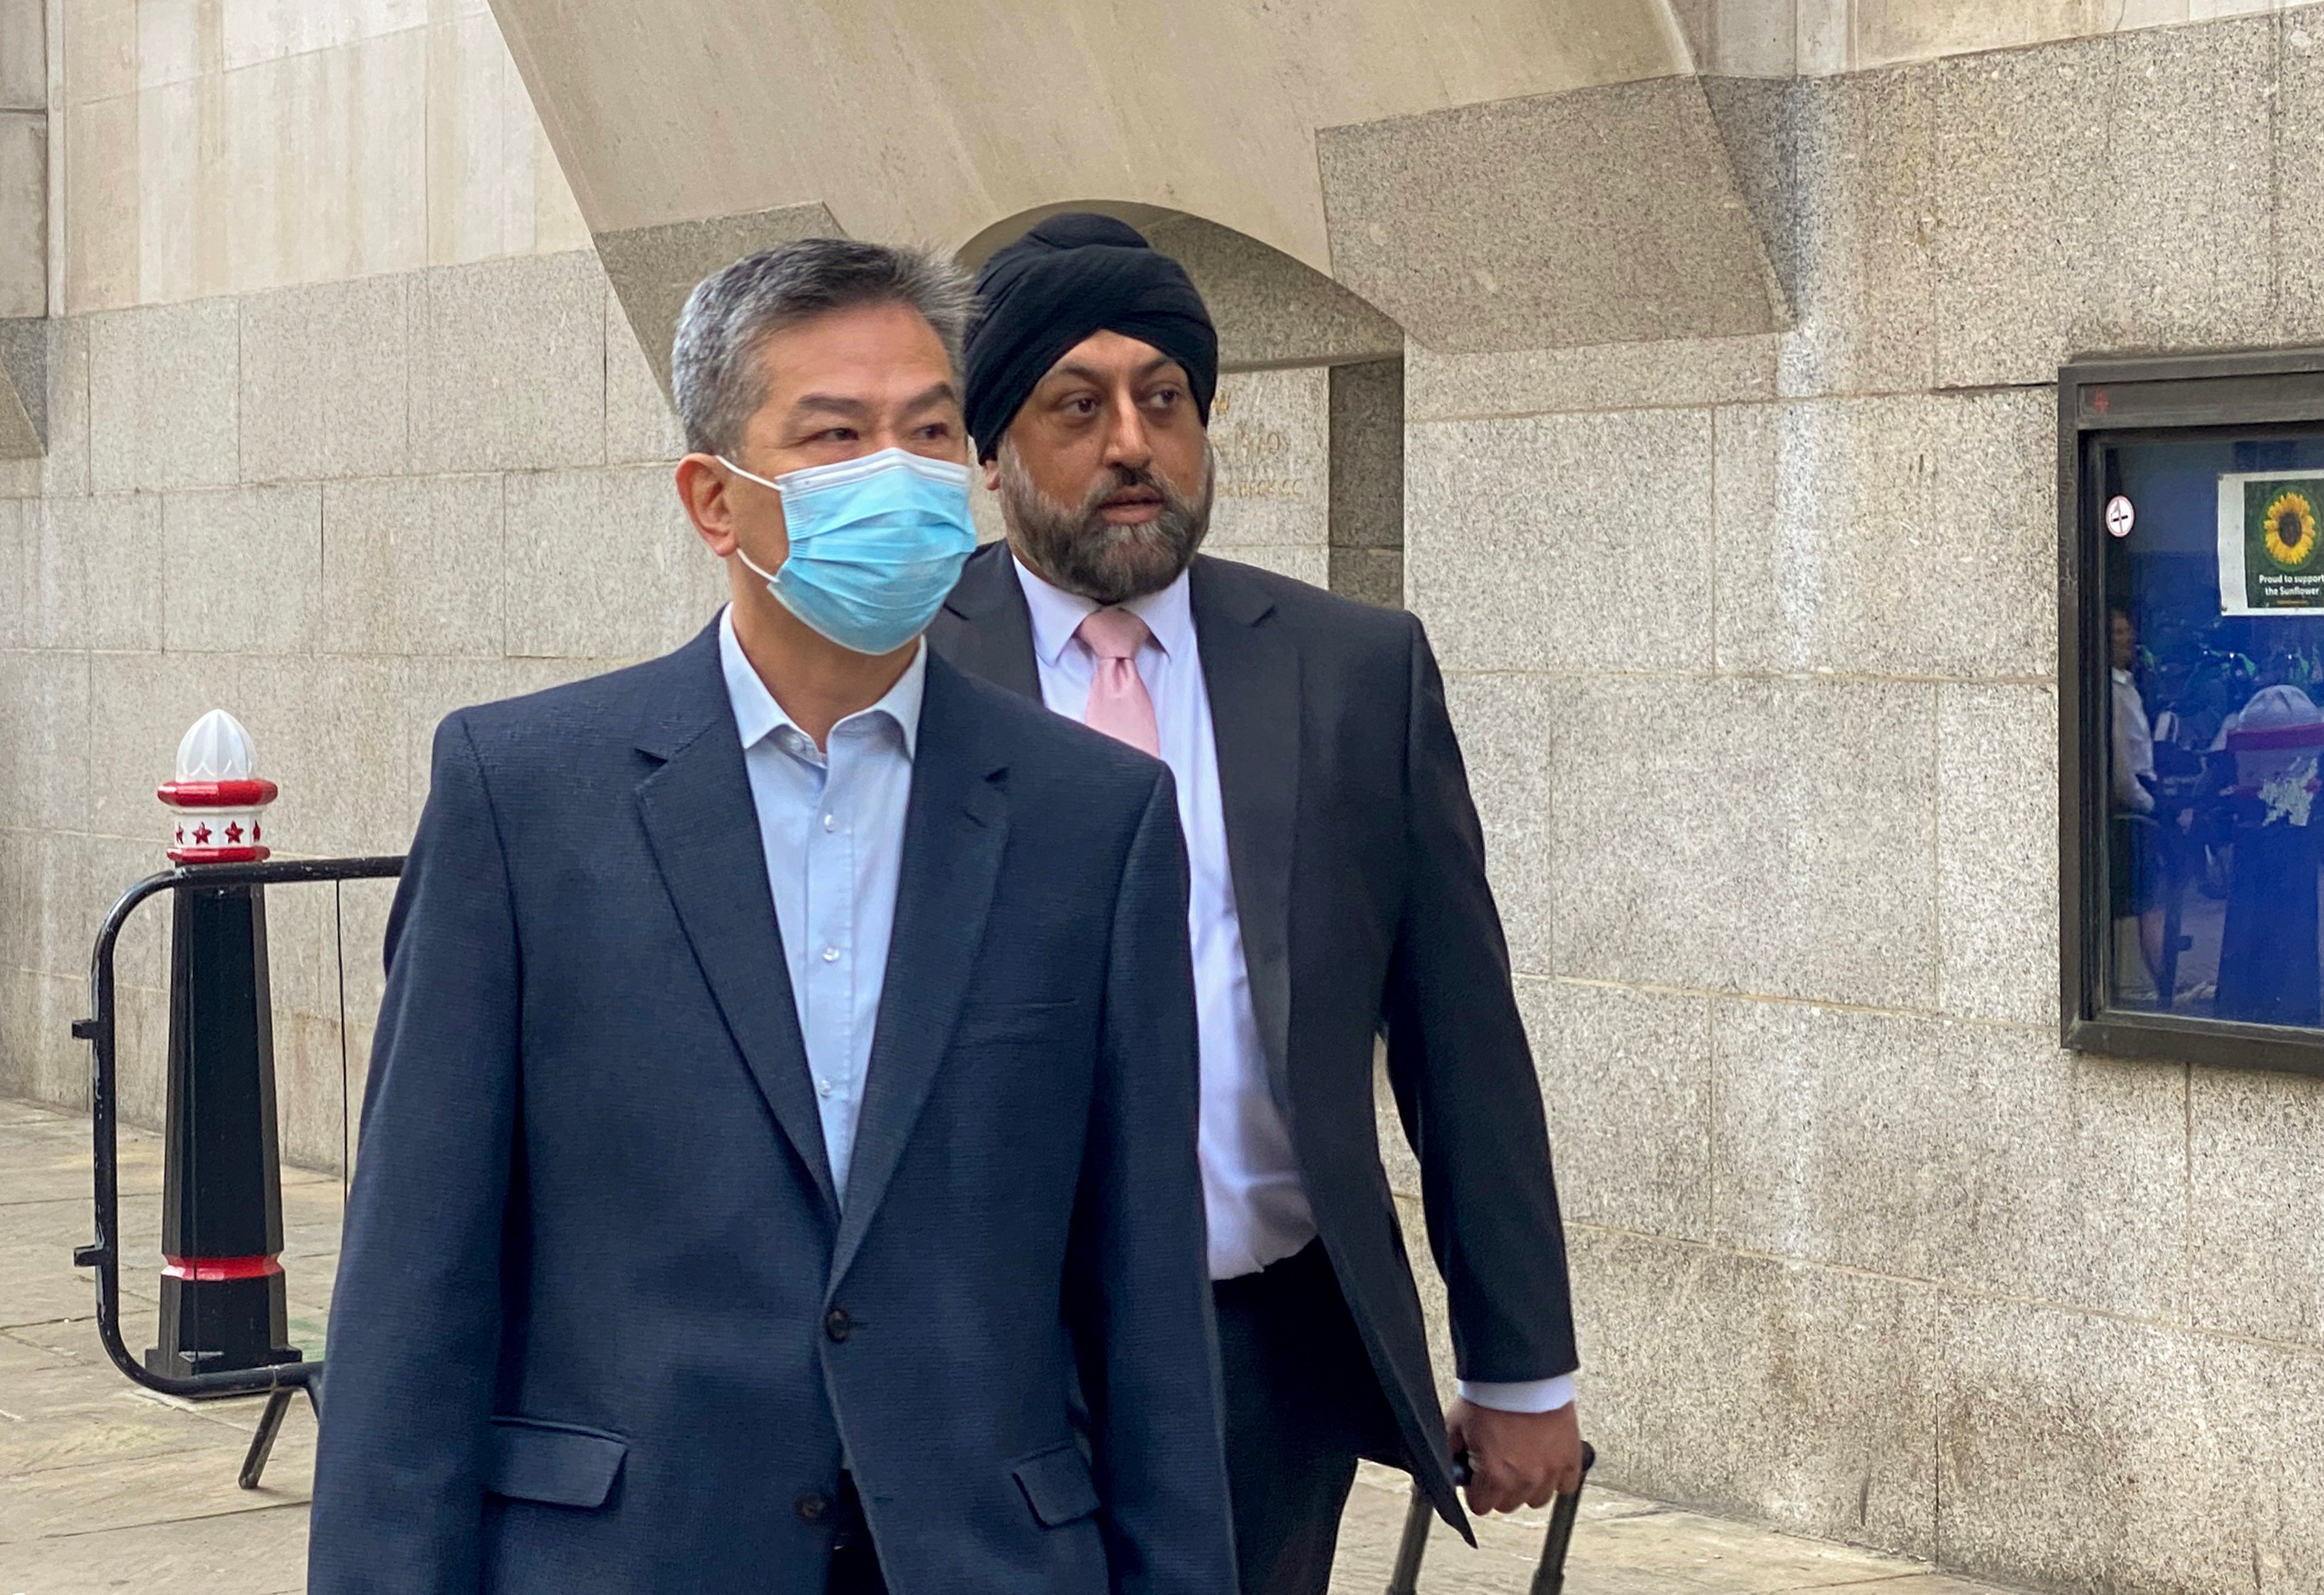 HKETO office manager Bill Yuen heads to court on Friday. Photo: Jack Tsang